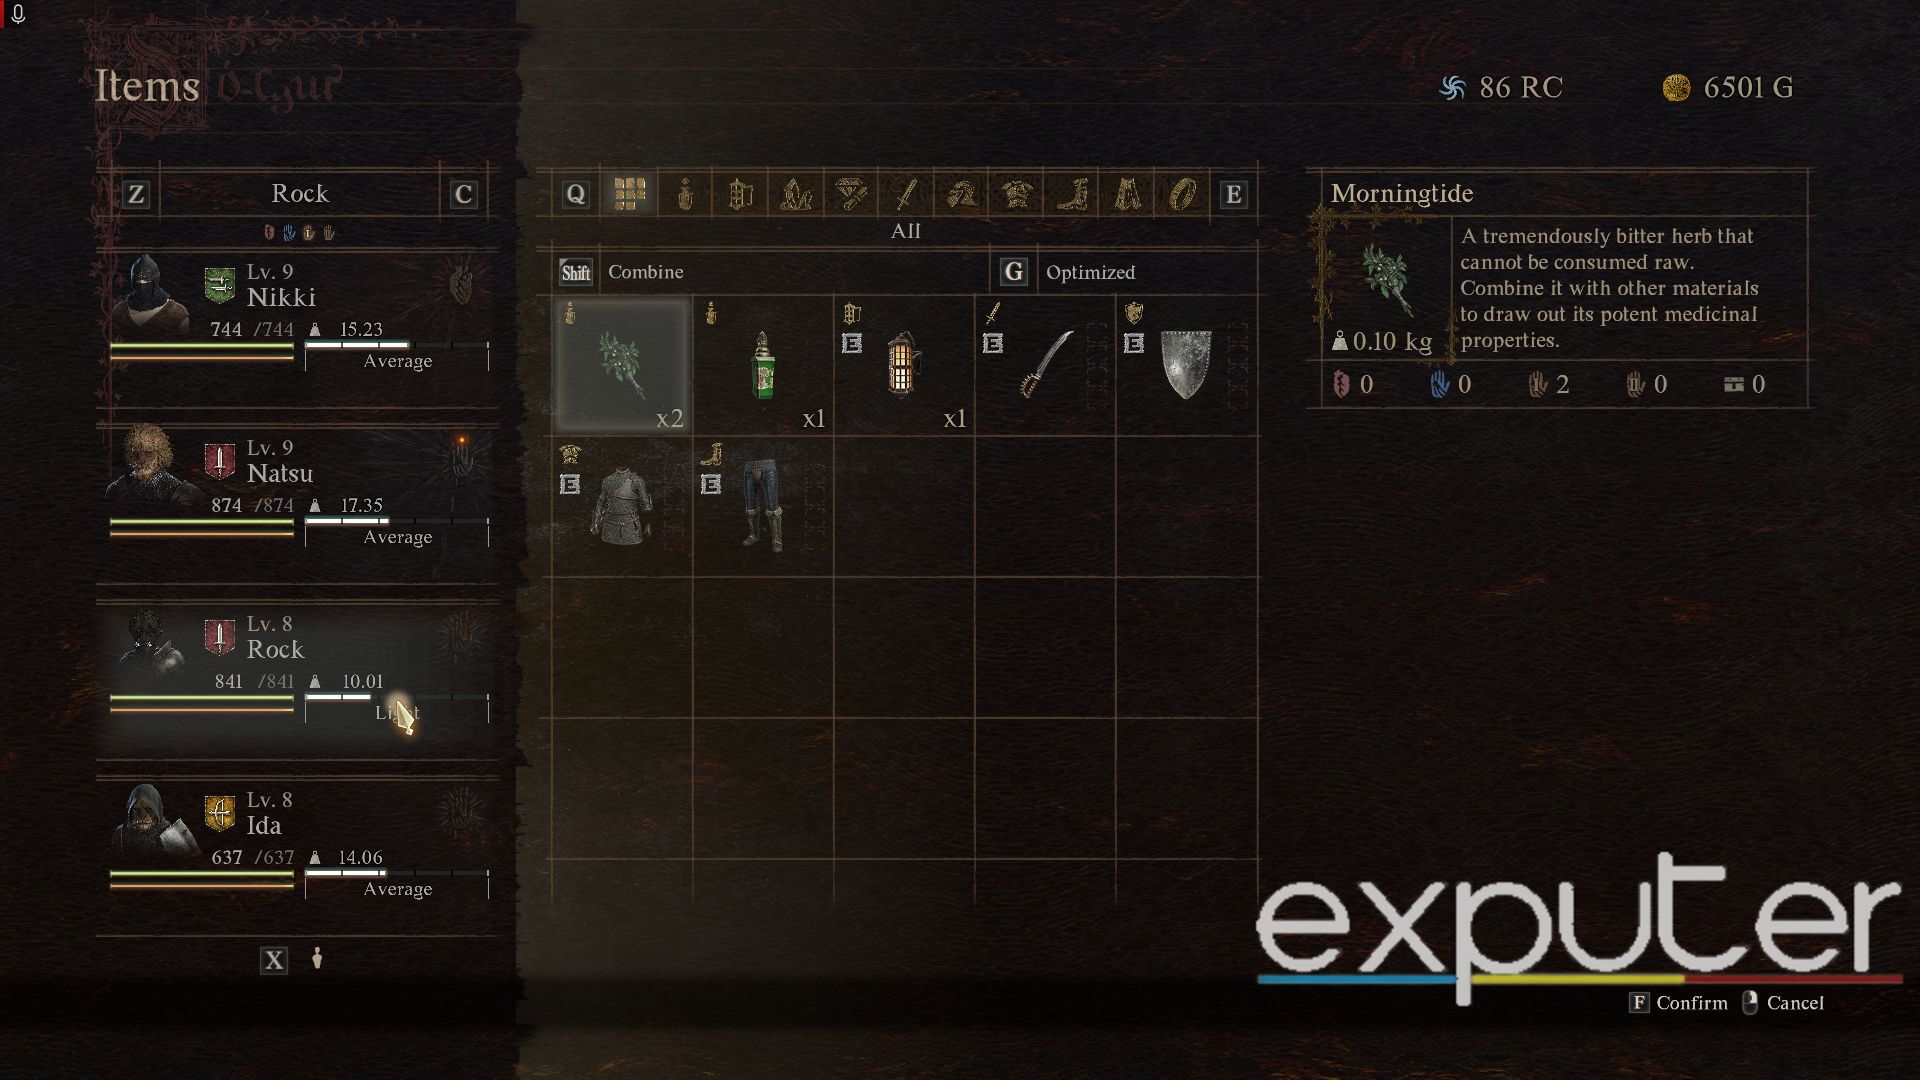 Managing the Inventory by giving items to pawns